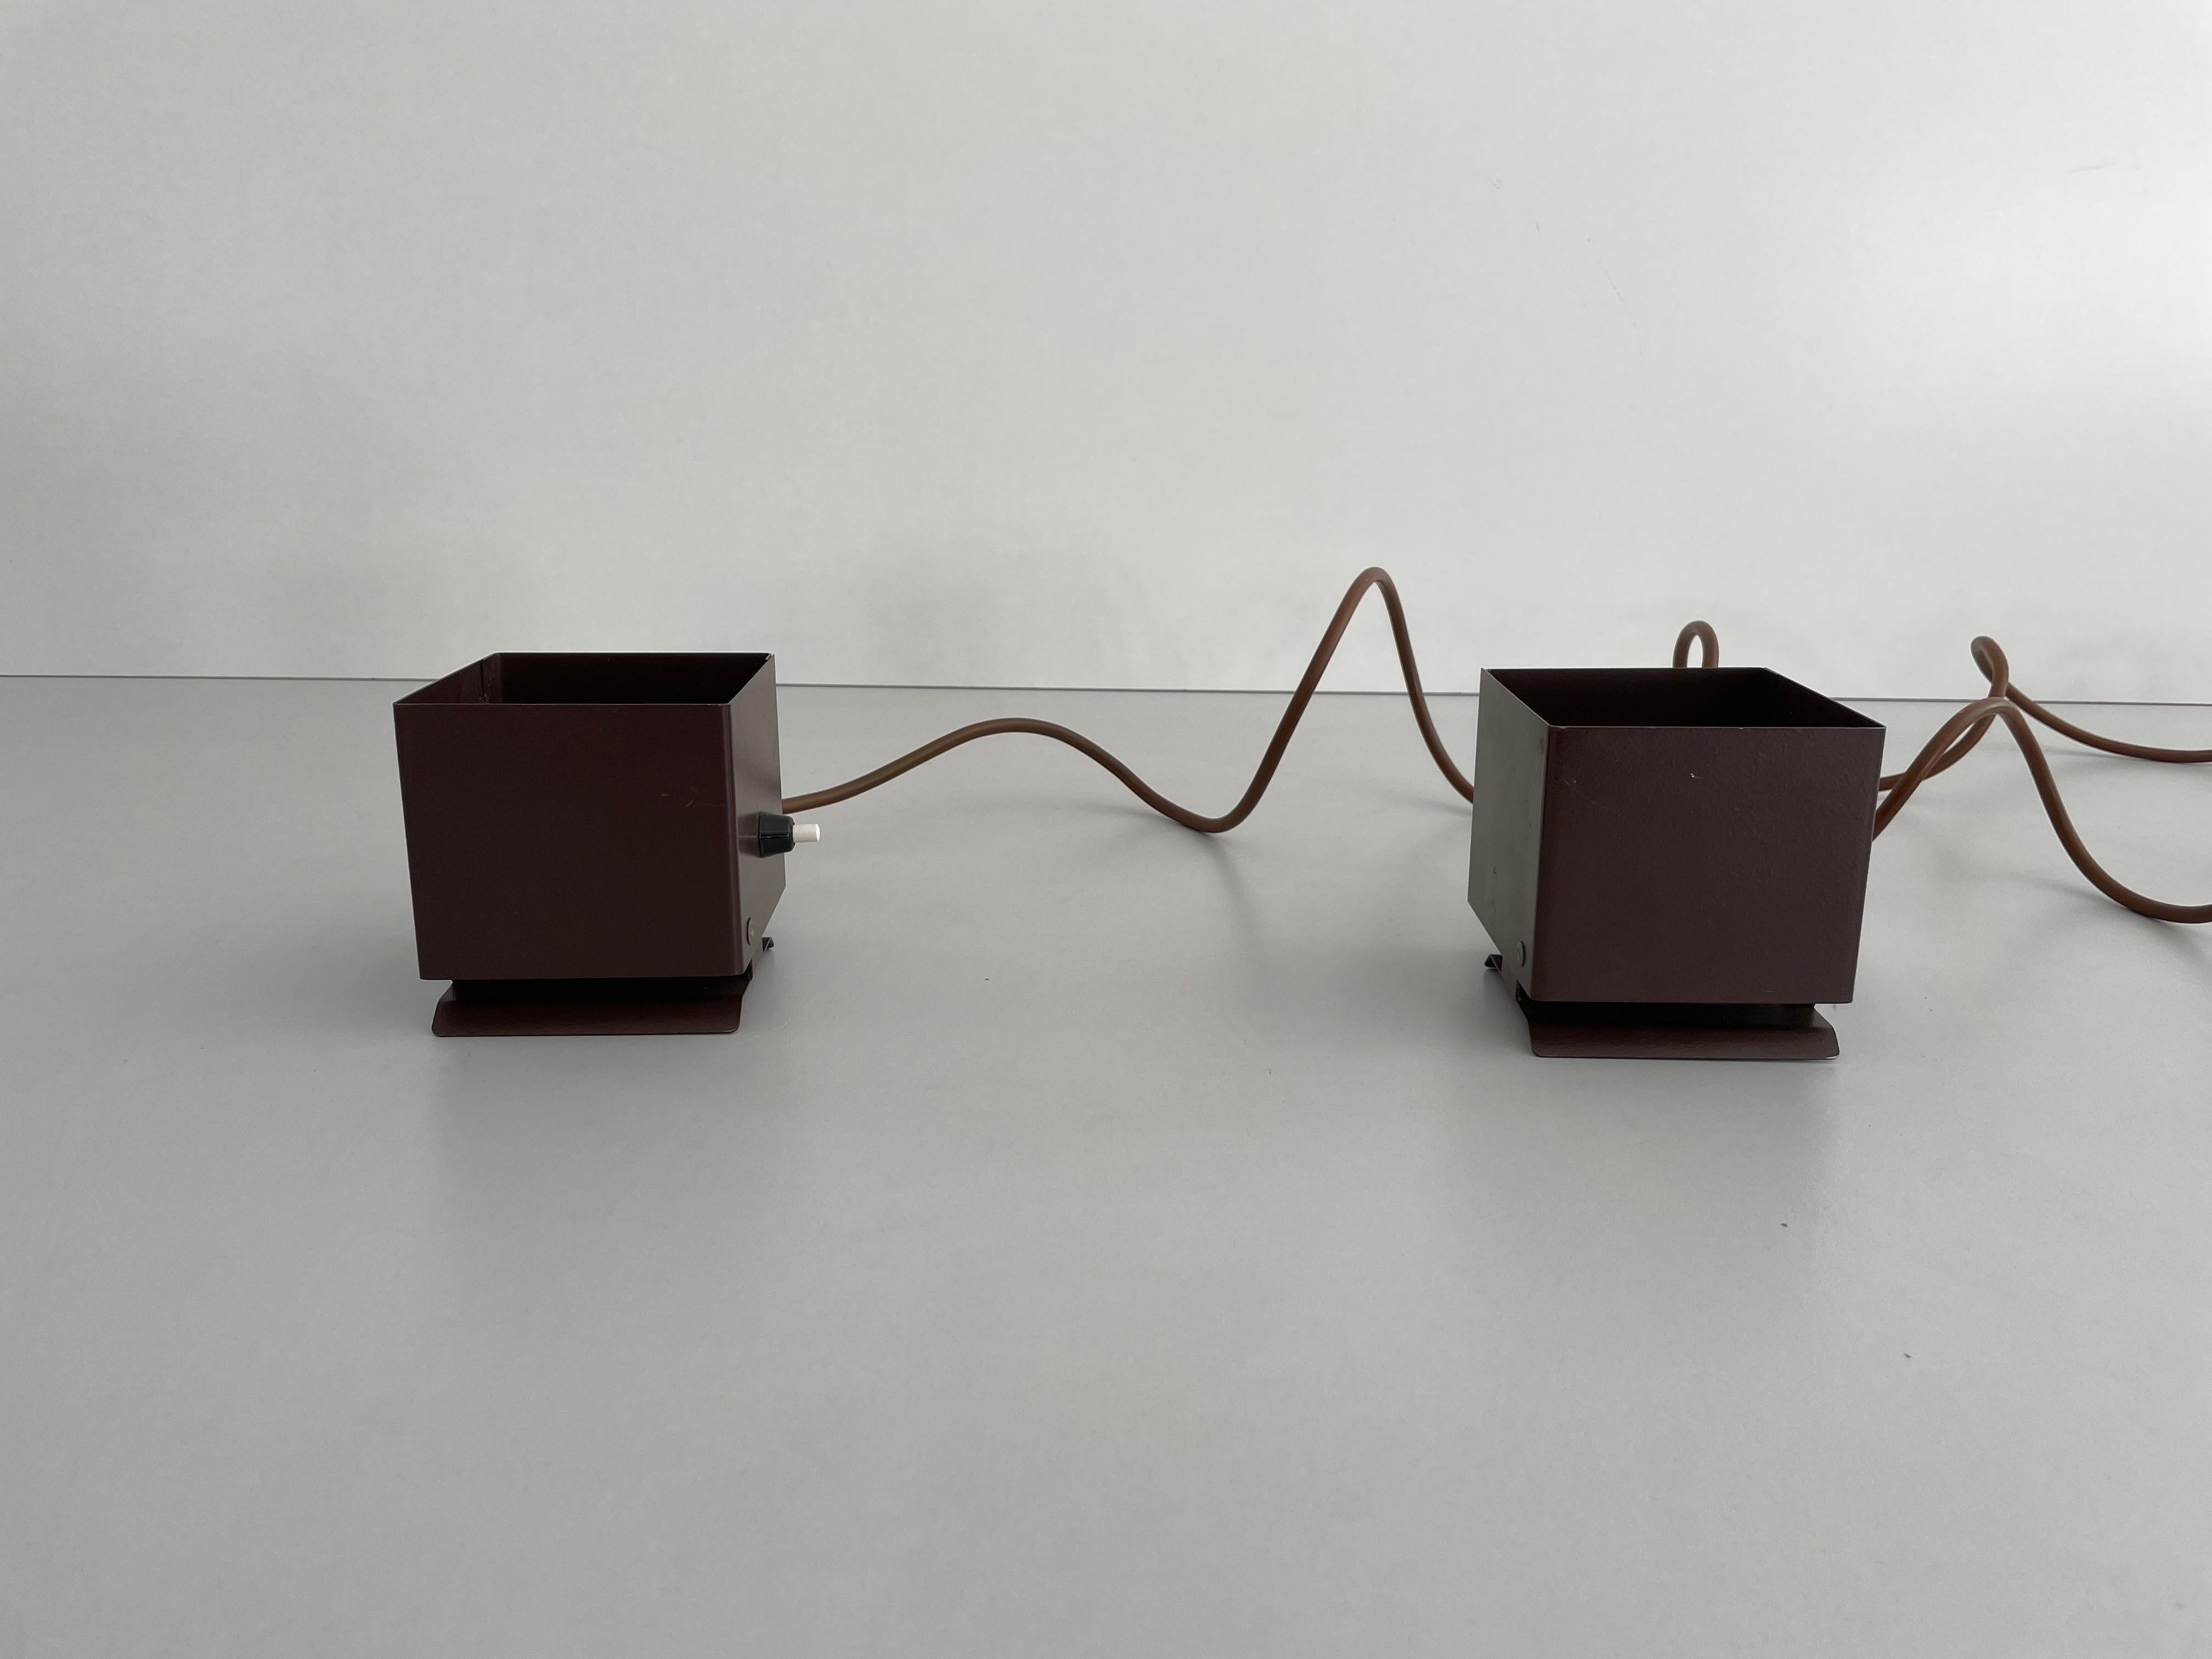 Cube Design Pair of Wall Lamps by Rudolf von Prusky, 1970s, Germany

Very elegant and minimal design wall lamps
Lamp is in very good condition.

These lamps works with E14 standard light bulbs. 
Wired and suitable to use in all countries. (110-220